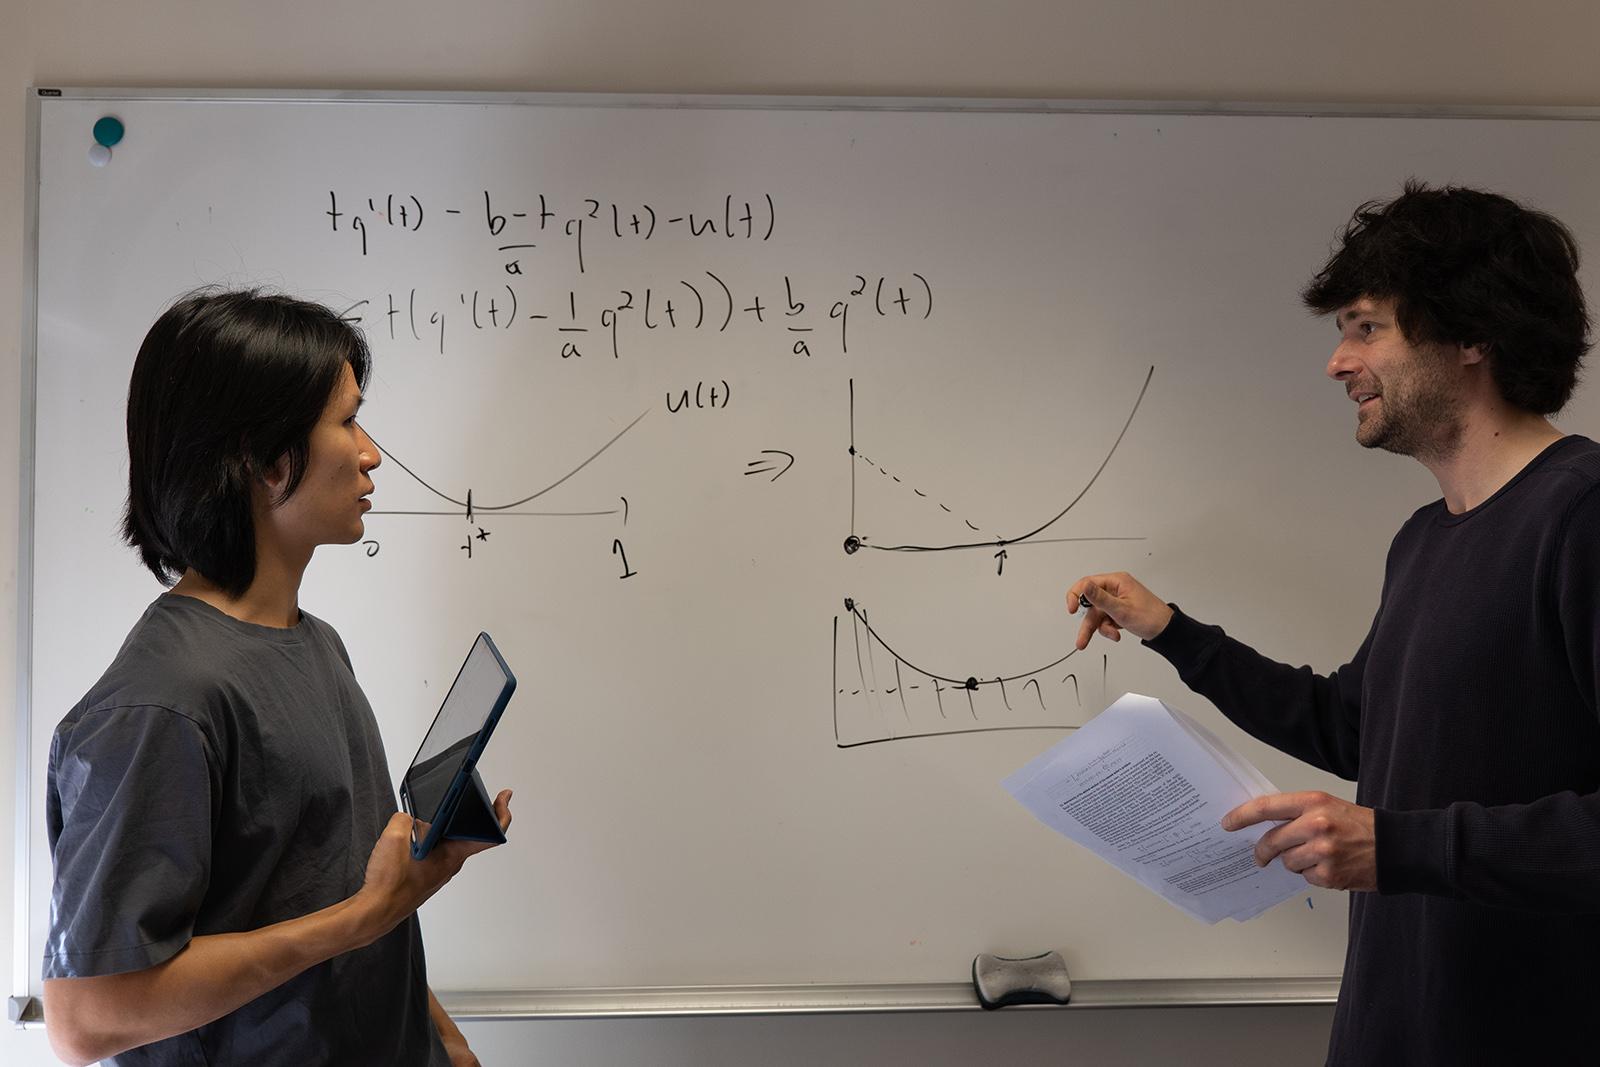 Professor and student talk while pointing at writing on a white board